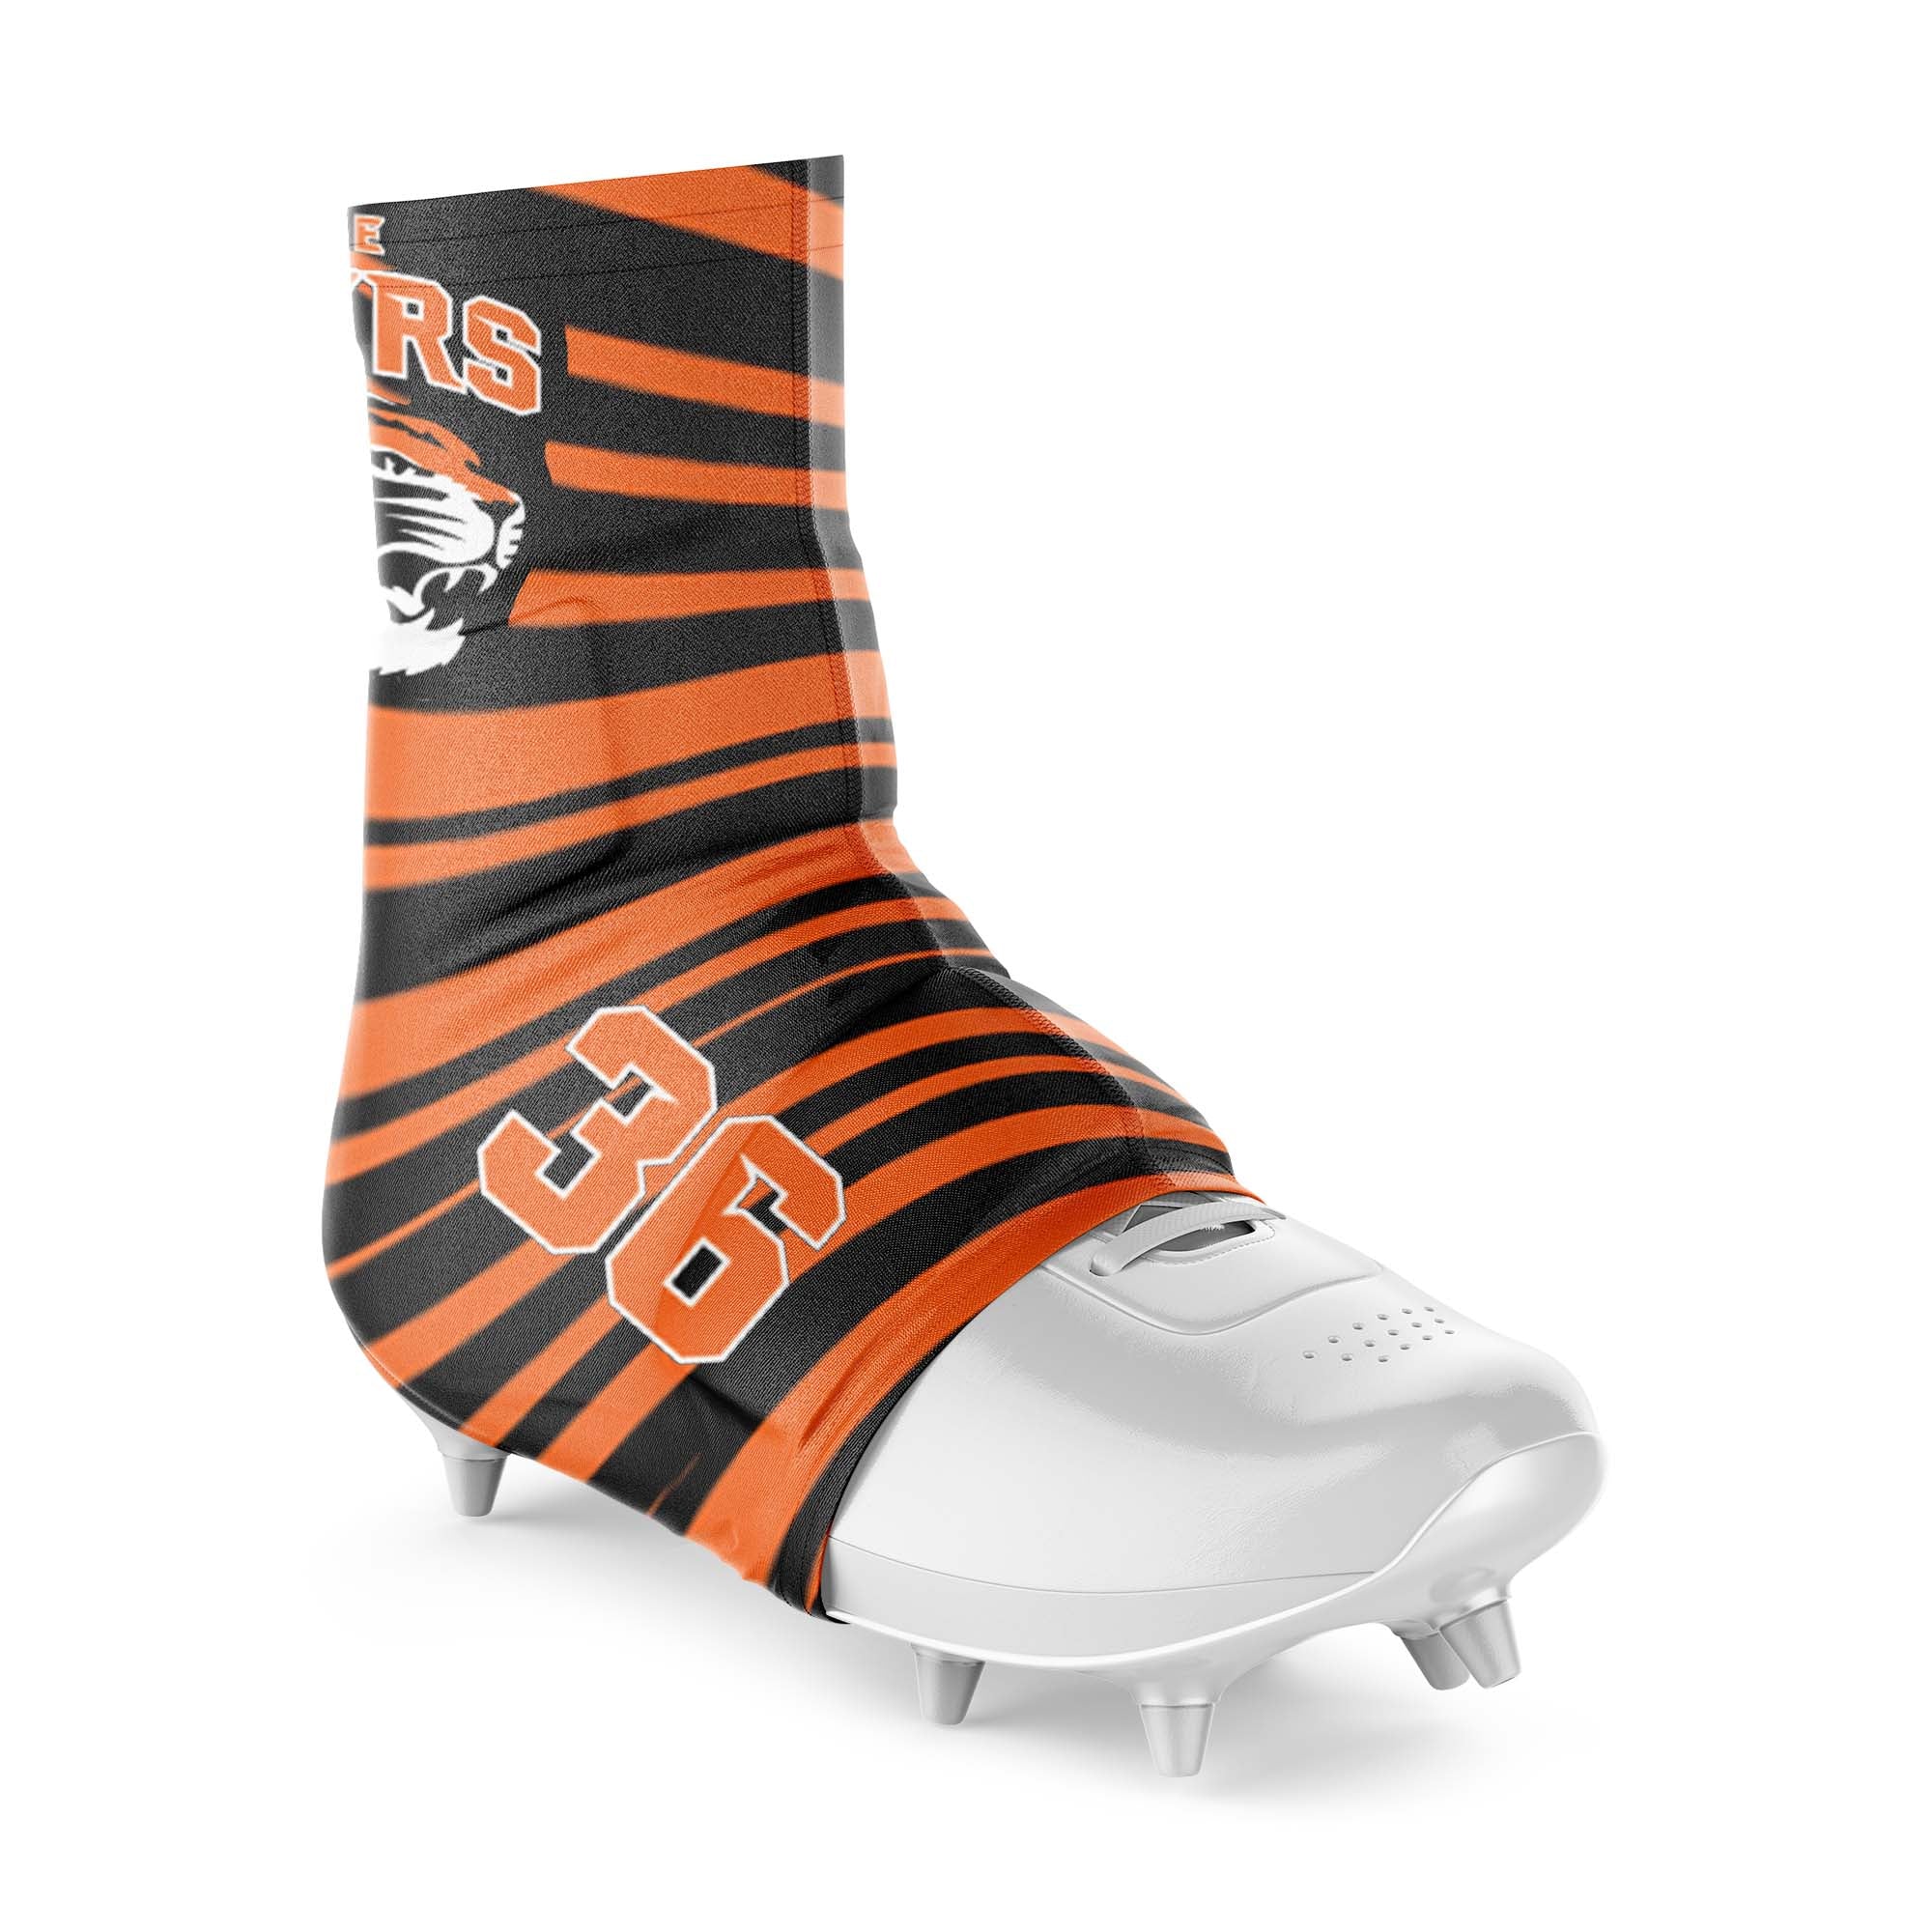 LINDEN TIGERS Spat/Cleat Cover